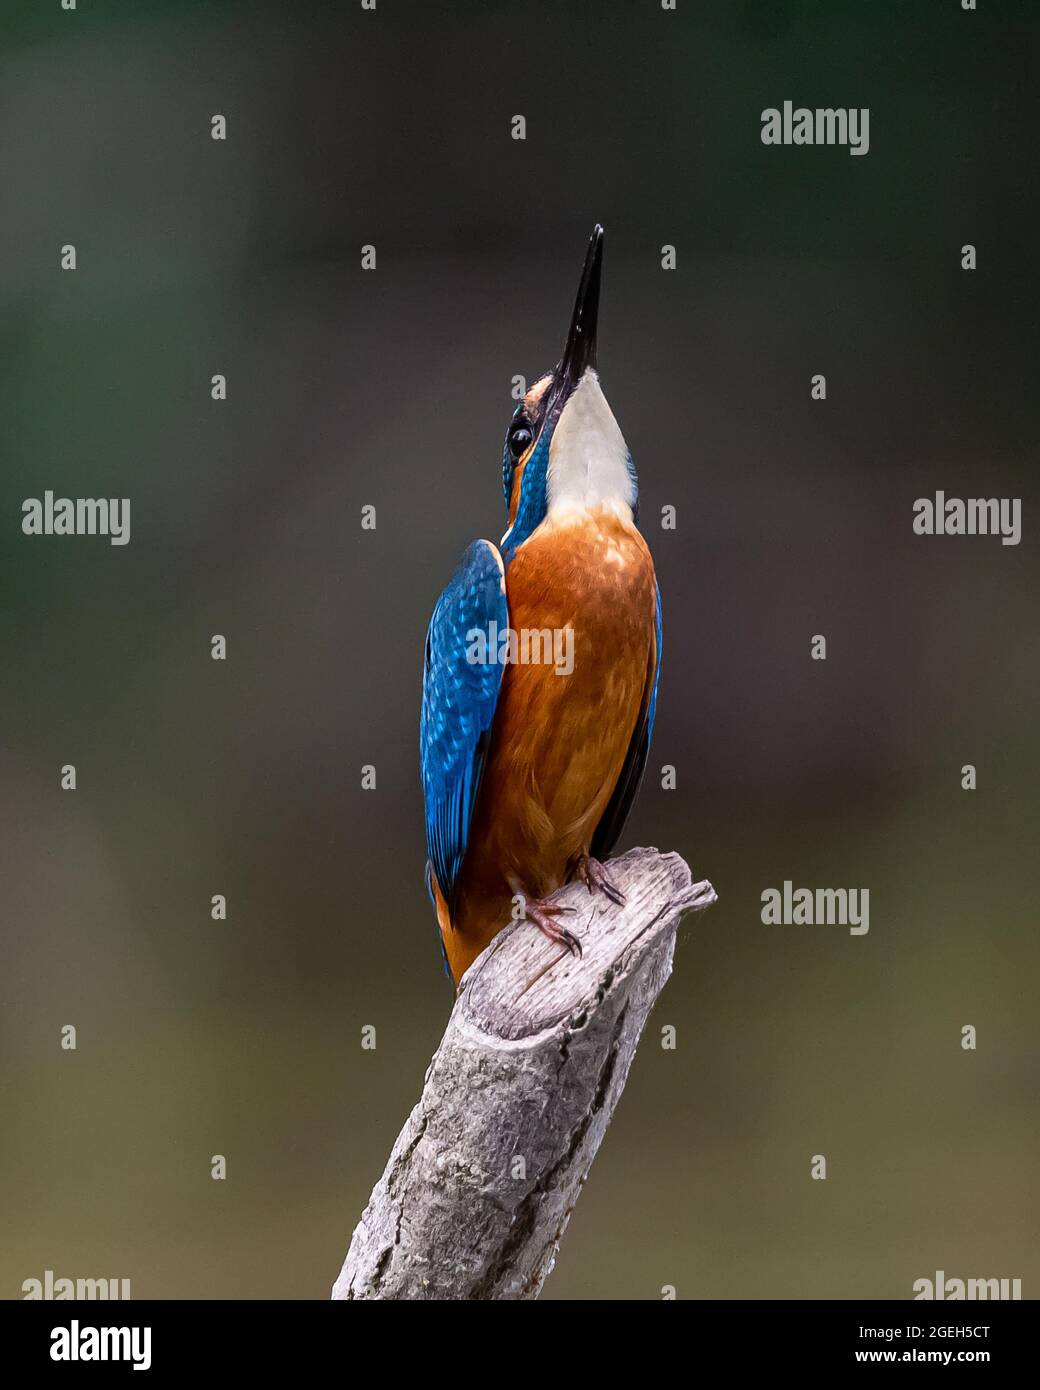 Kingfisher looking up Stock Photo